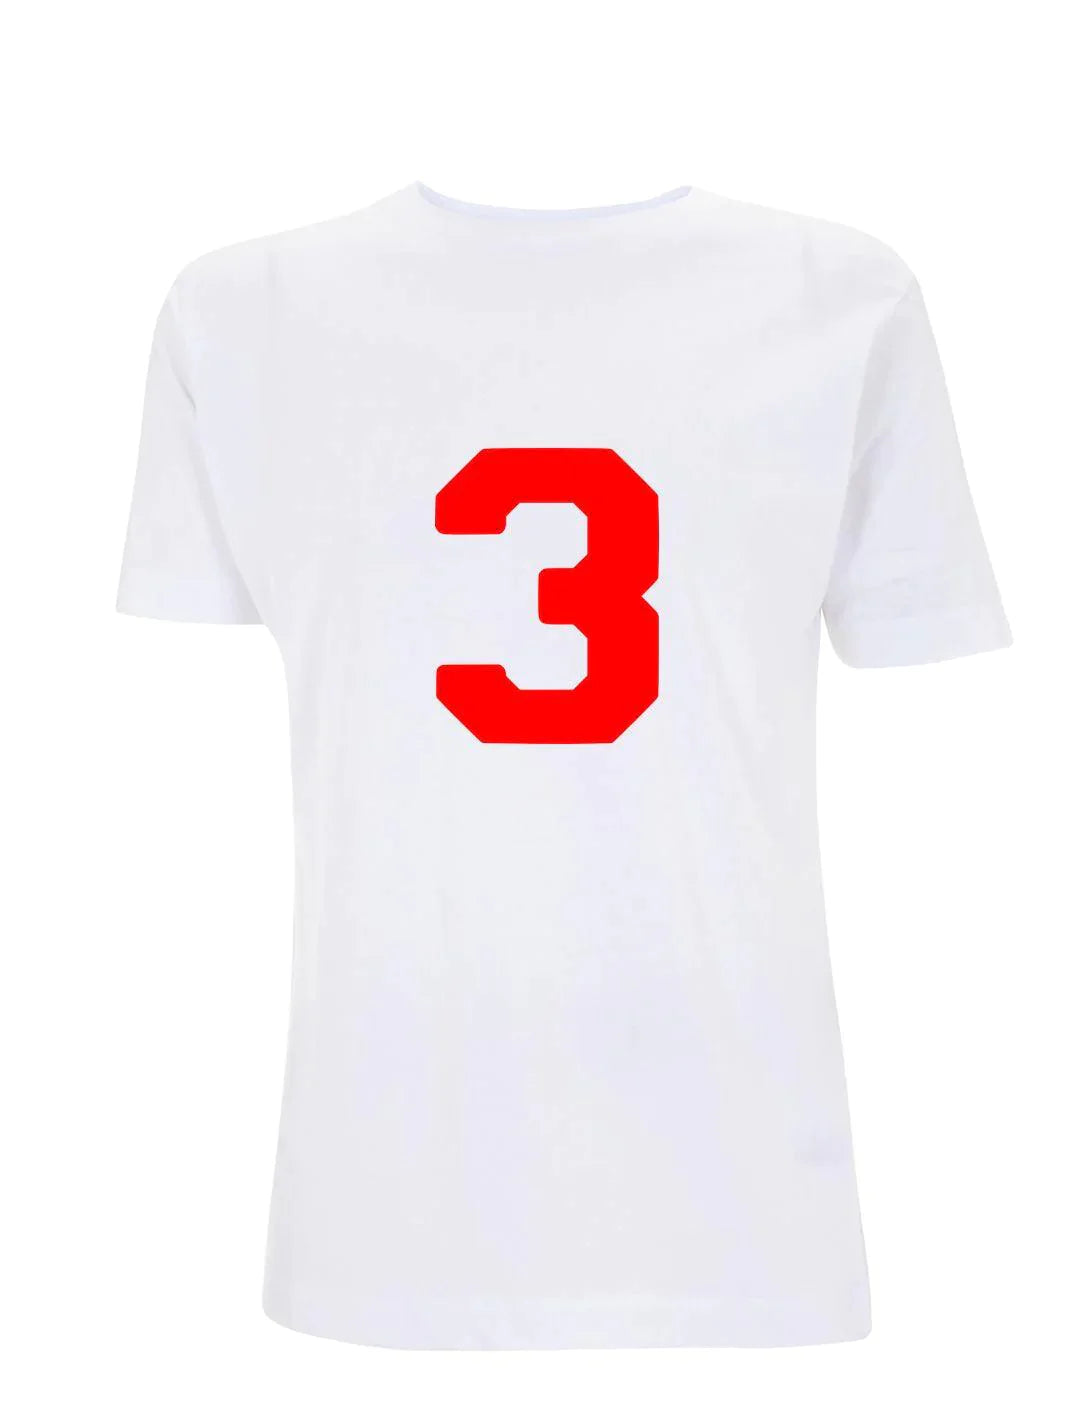 3: T-Shirt As Worn by Jack White (The White Stripes) Many Colours - SOUND IS COLOUR